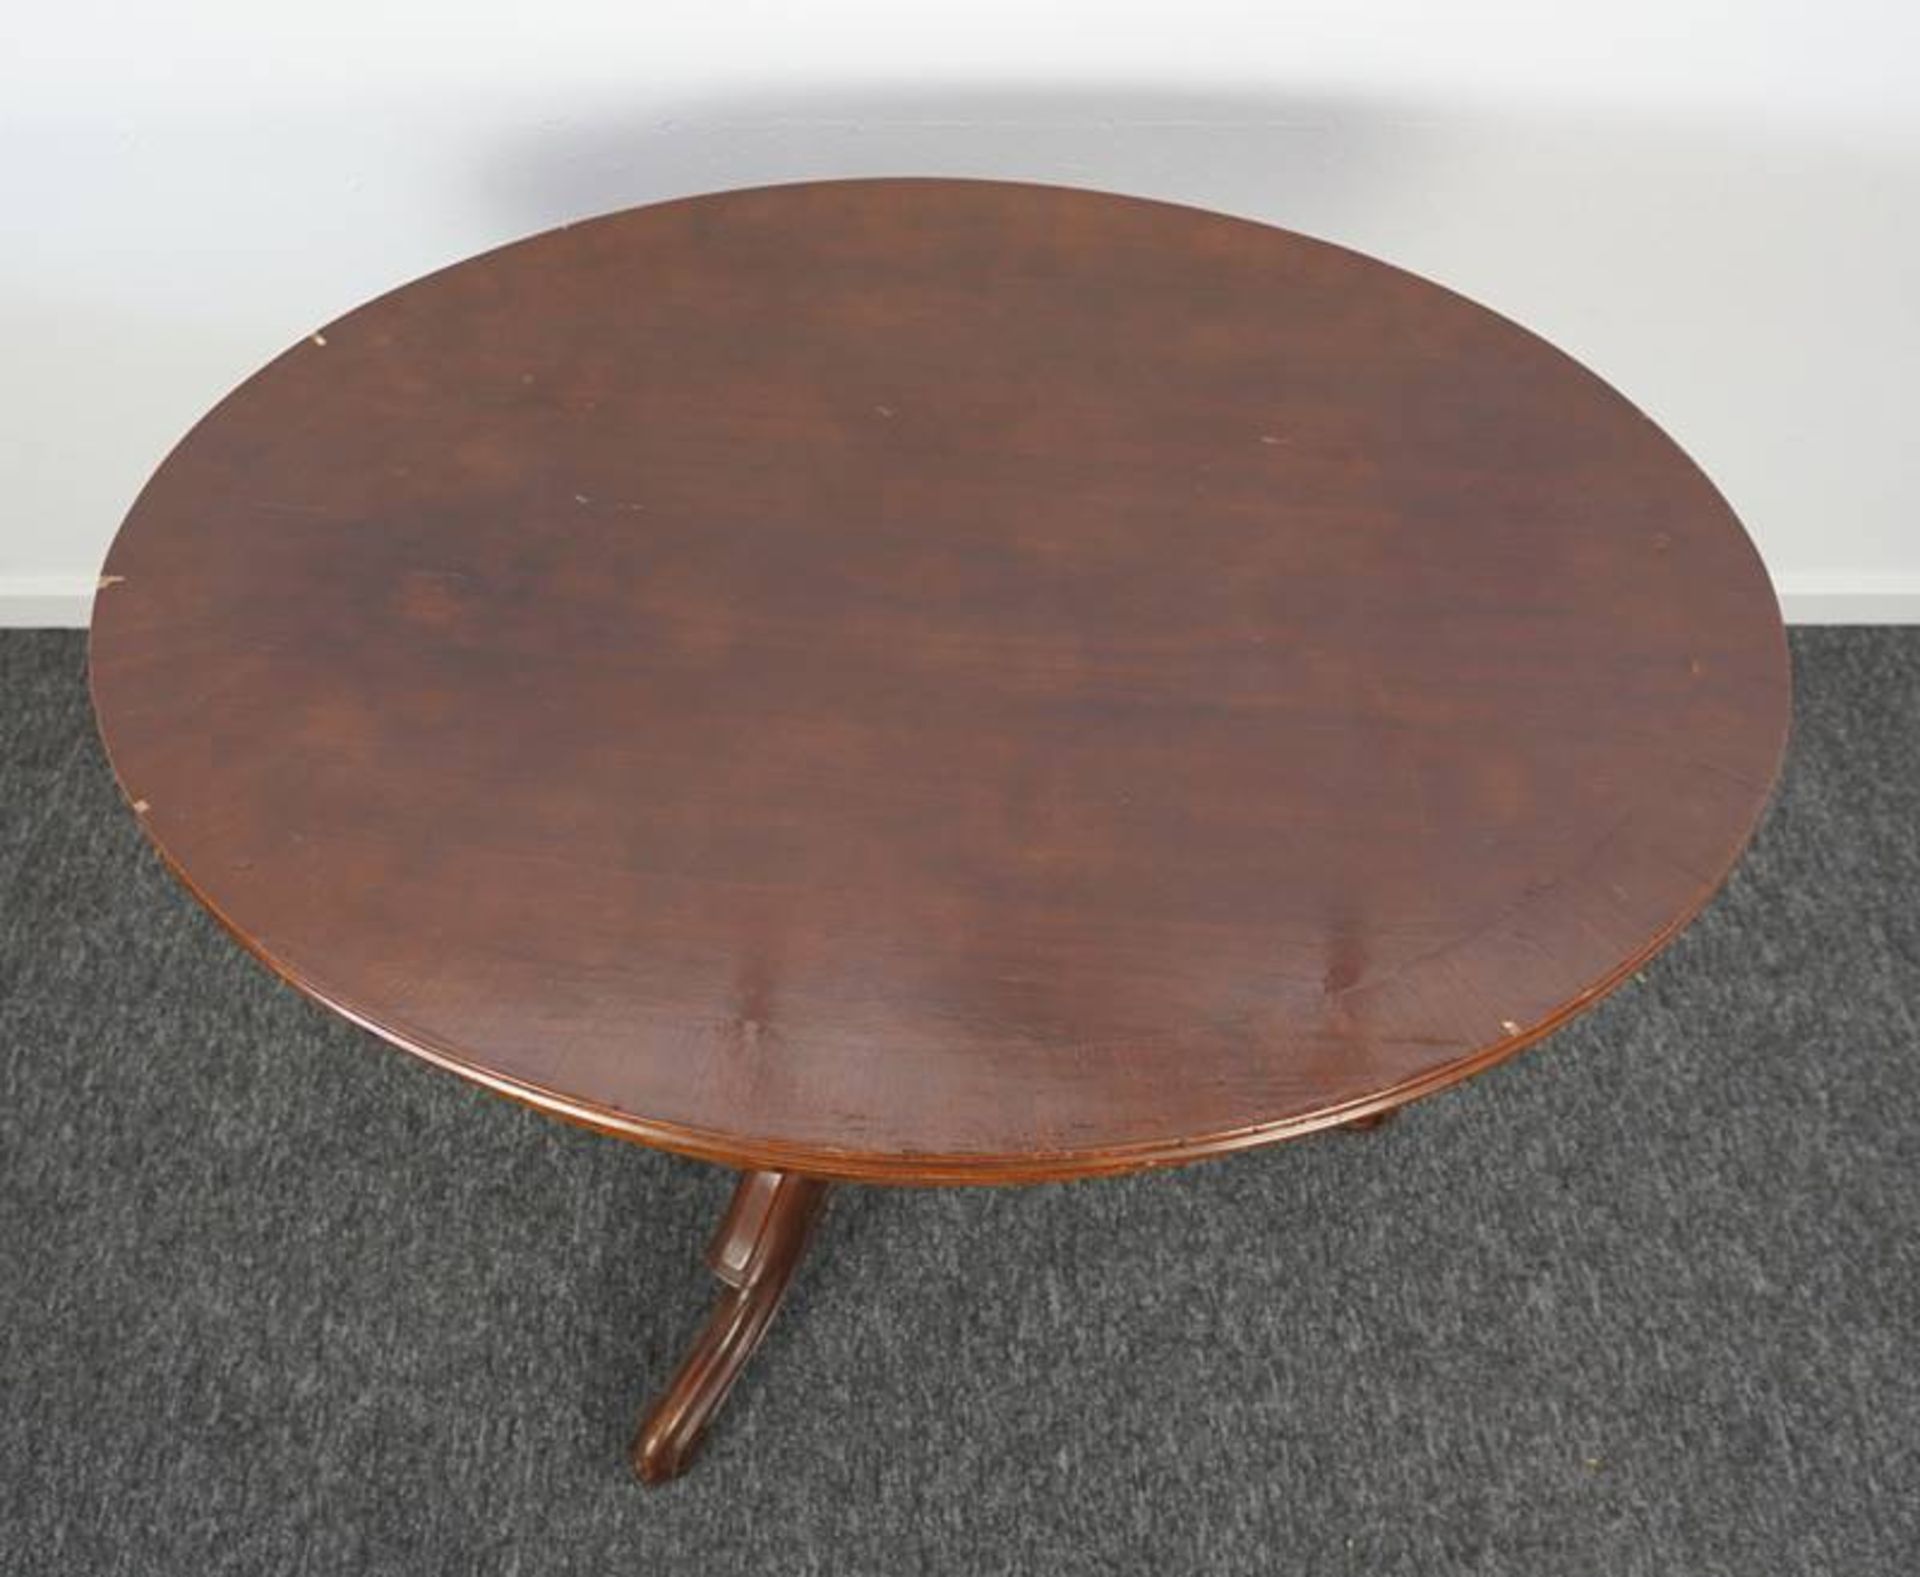 Louis-Philippe table - Image 2 of 4